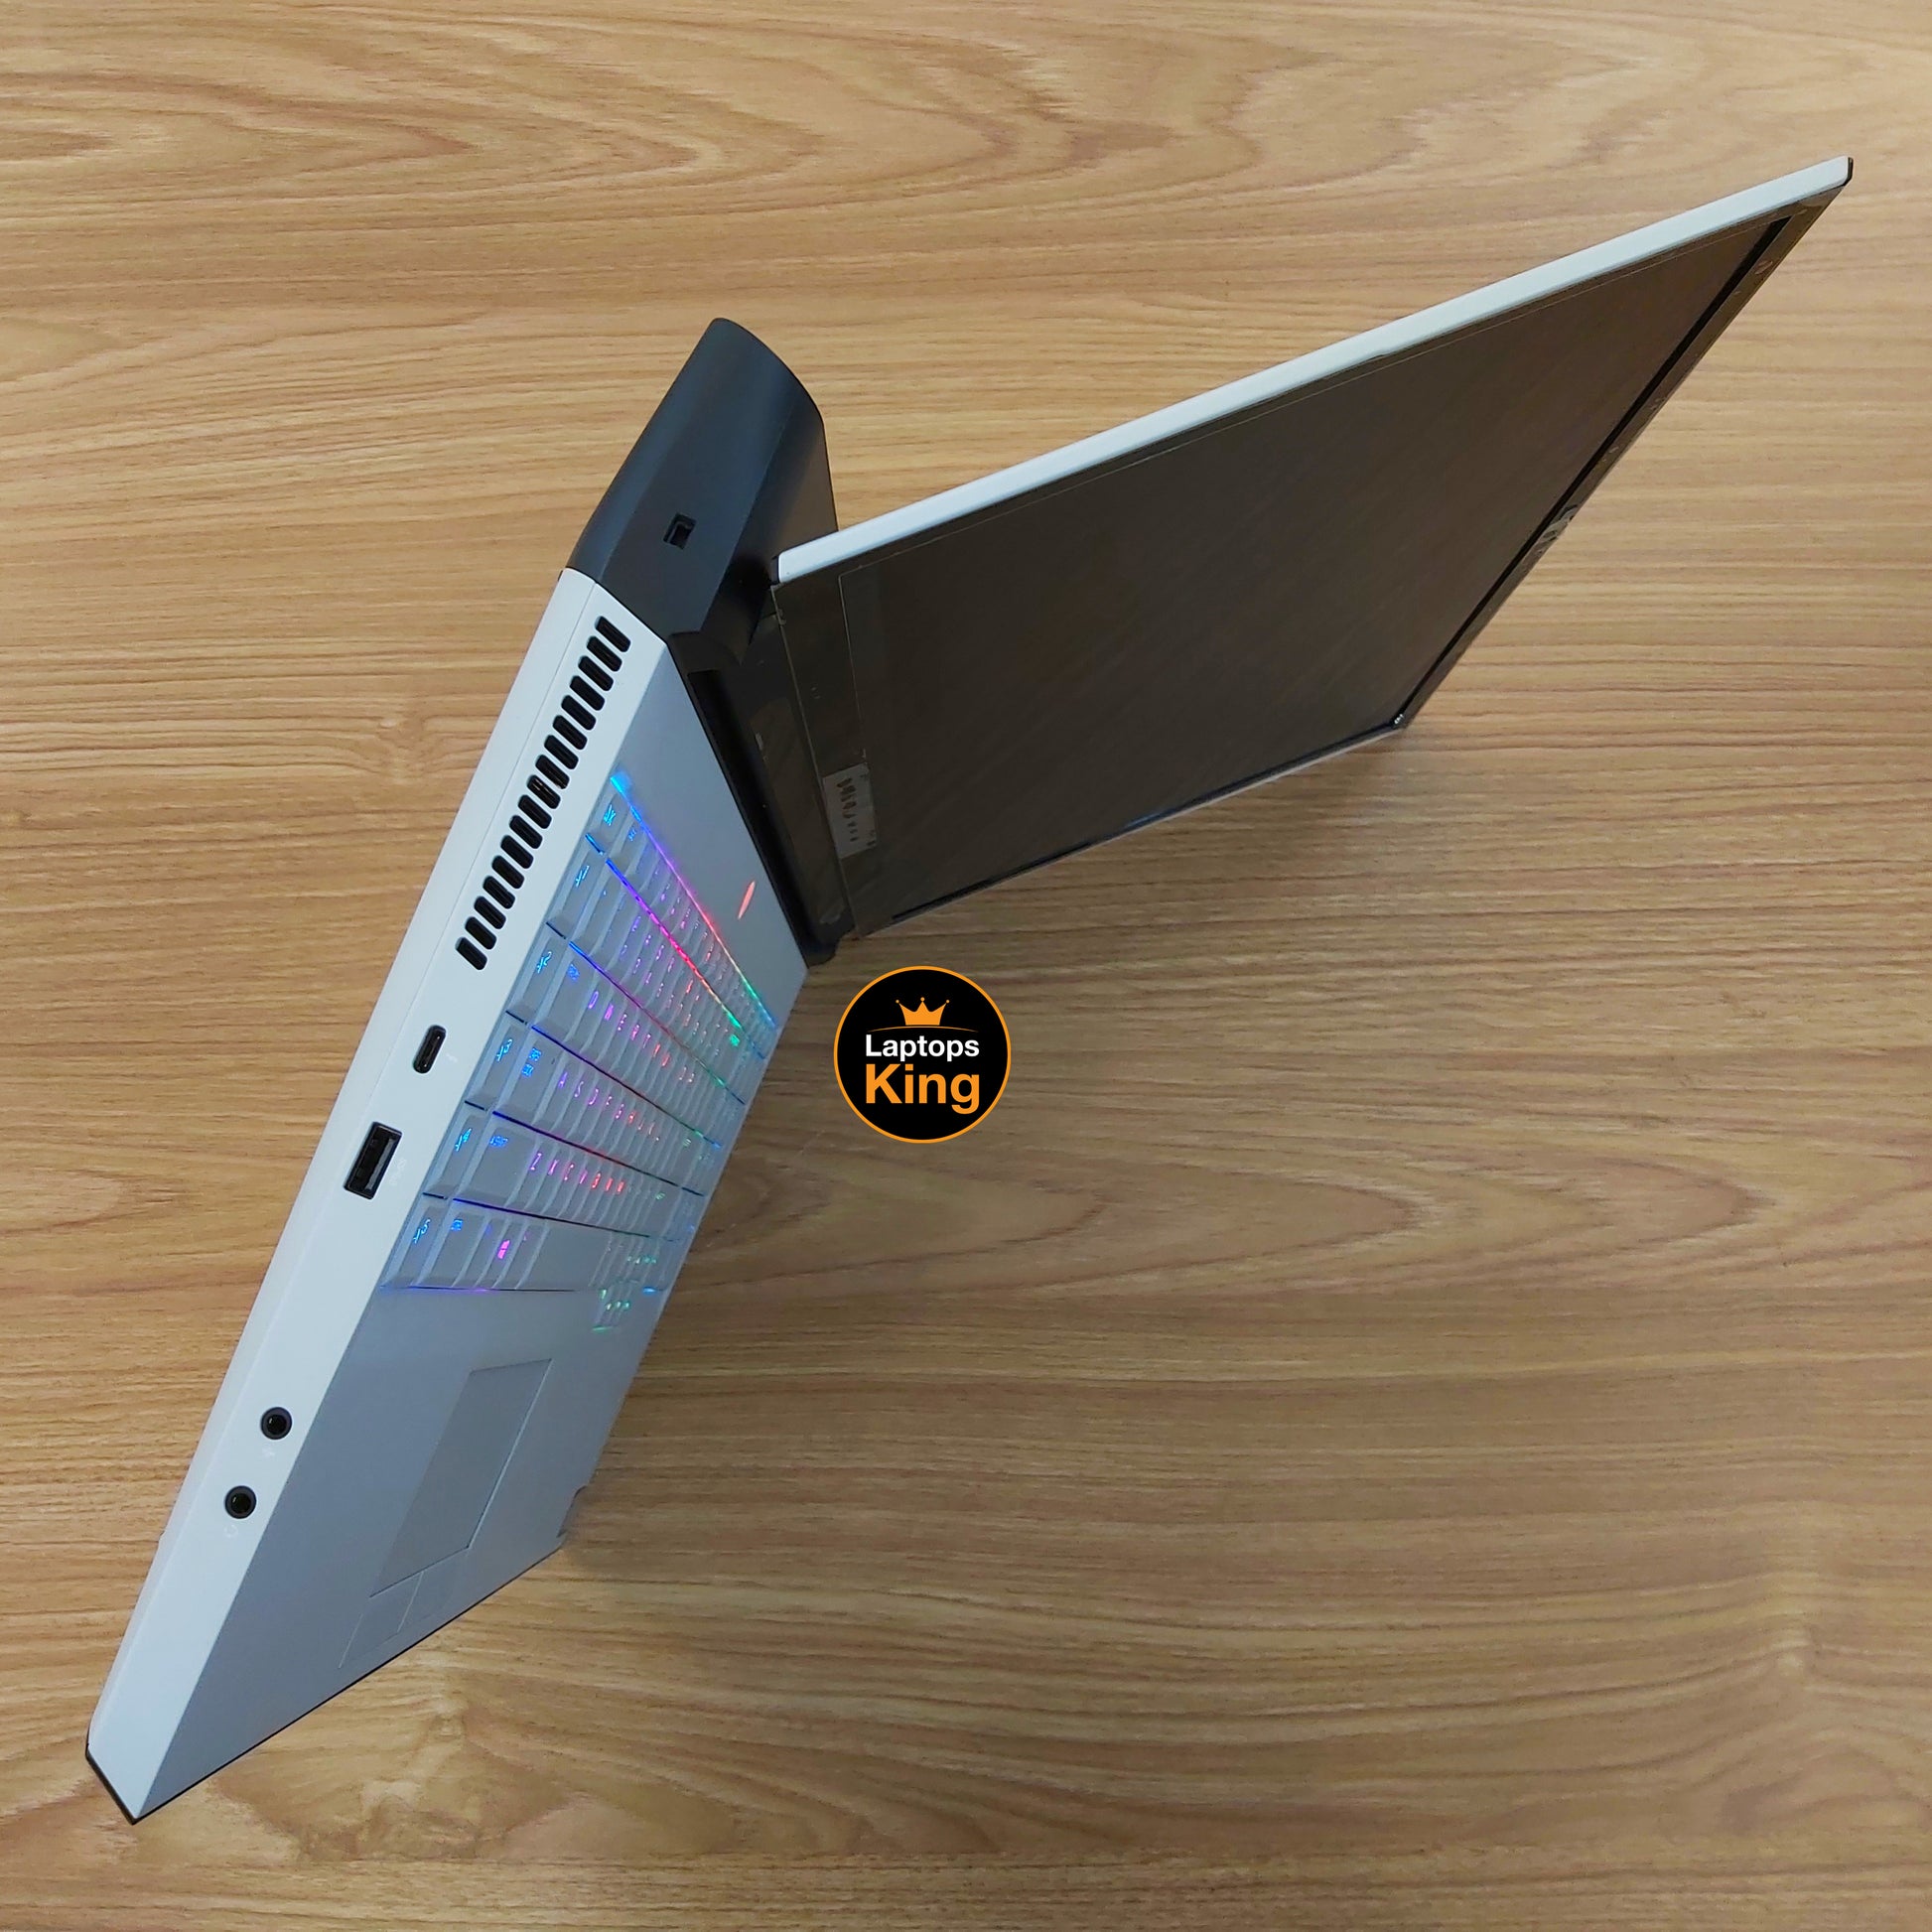 Alienware Area-51m i9-9900k RTX 2070 144hz Gaming Laptop (New Open Box) Gaming laptop, Graphic Design laptop, best laptop for gaming, best laptop for graphic design, computer for sale Lebanon, laptop for video editing in Lebanon, laptop for sale Lebanon, best graphic design laptop,	best video editing laptop, best programming laptop, laptop for sale in Lebanon, laptops for sale in Lebanon, laptop for sale in Lebanon, buy computer Lebanon, buy laptop Lebanon.